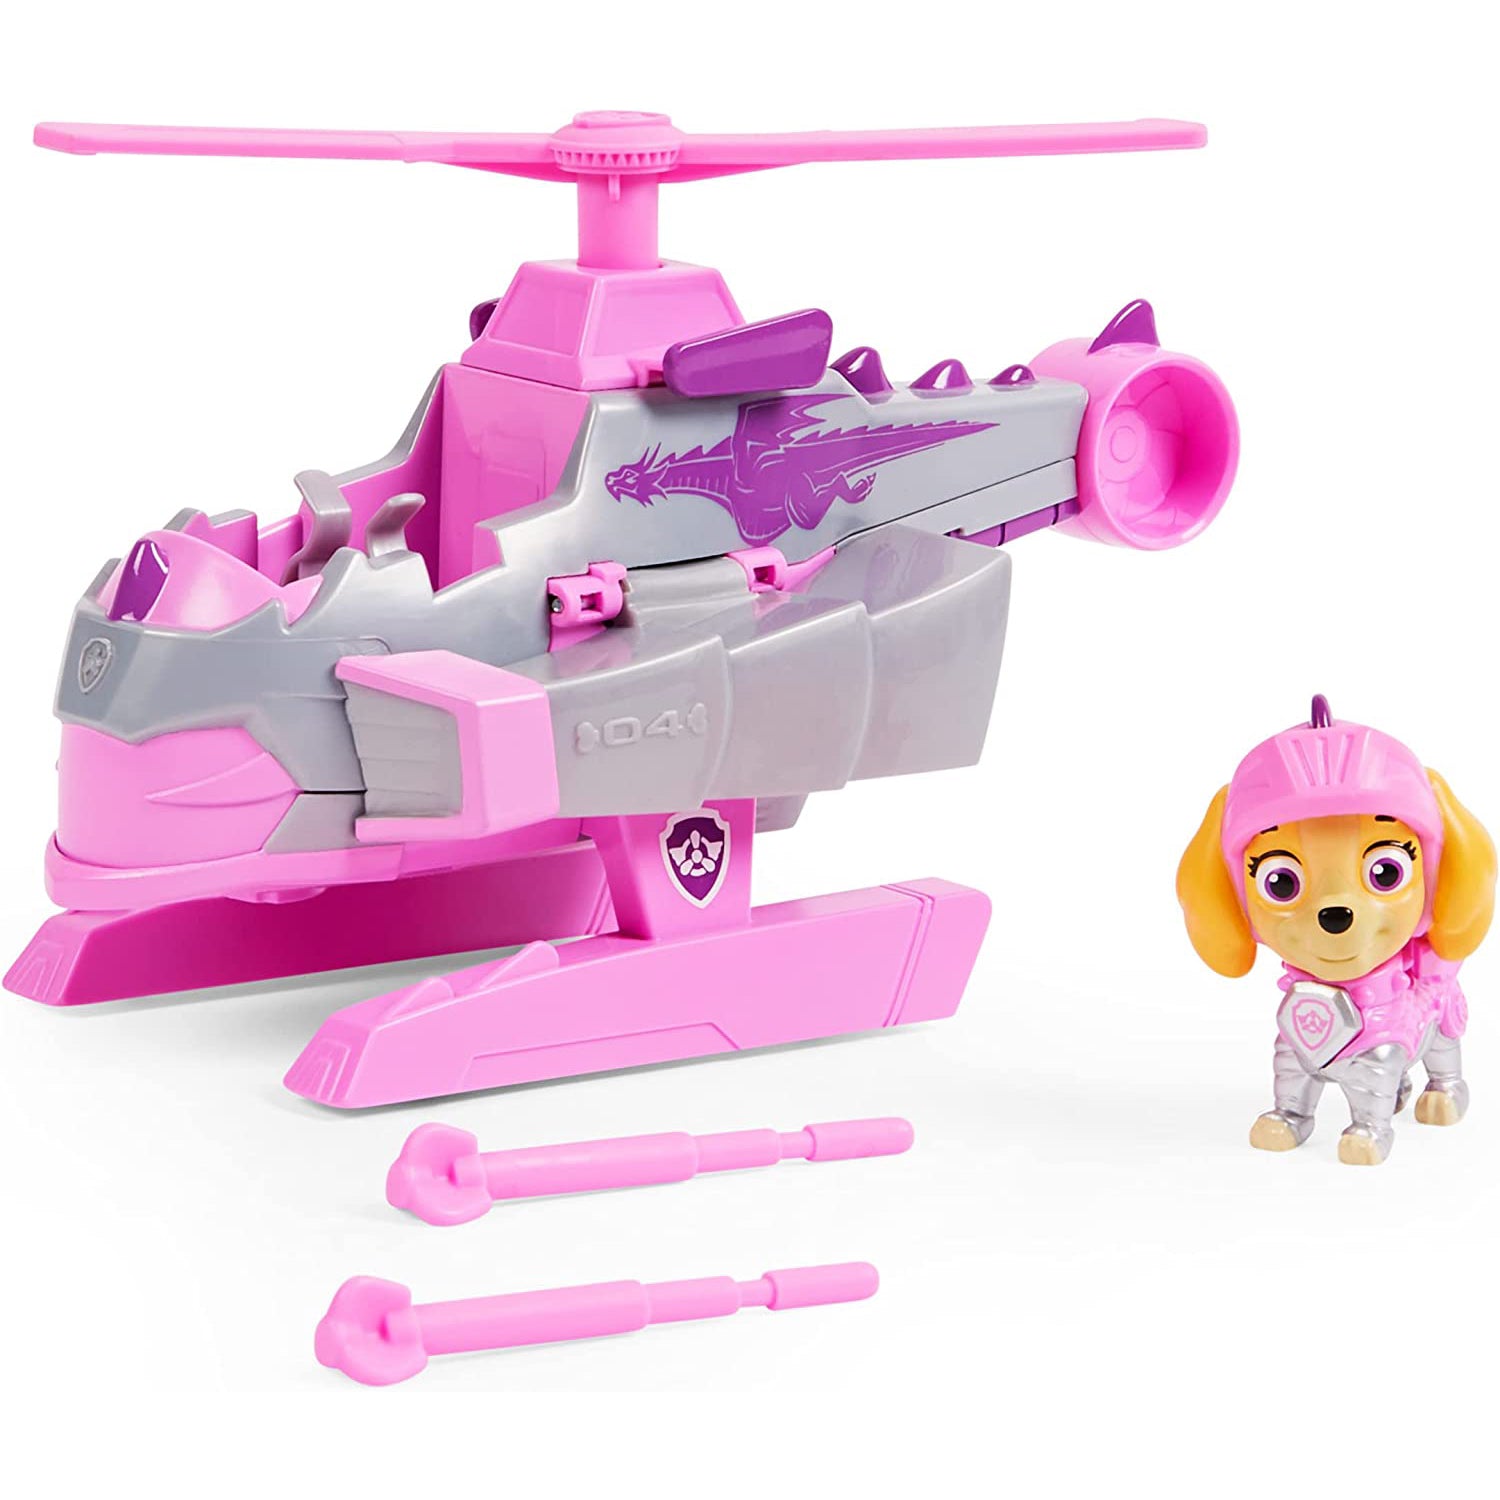 PAW PATROL Rescue Knights Skye Deluxe Vehicle and Figure